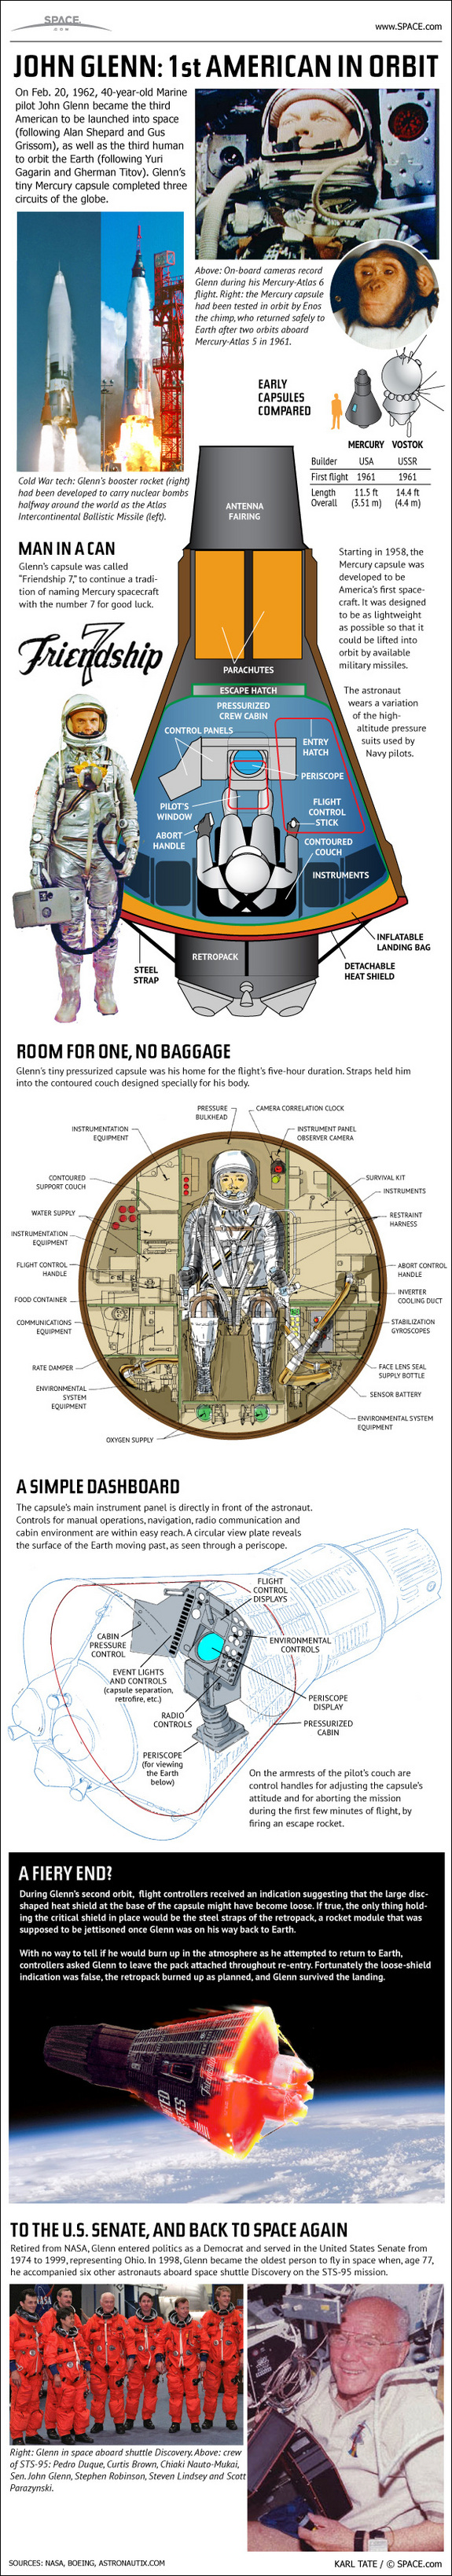 Learn about John Glenn's history-making Mercury space flight, in this SPACE.com infographic.